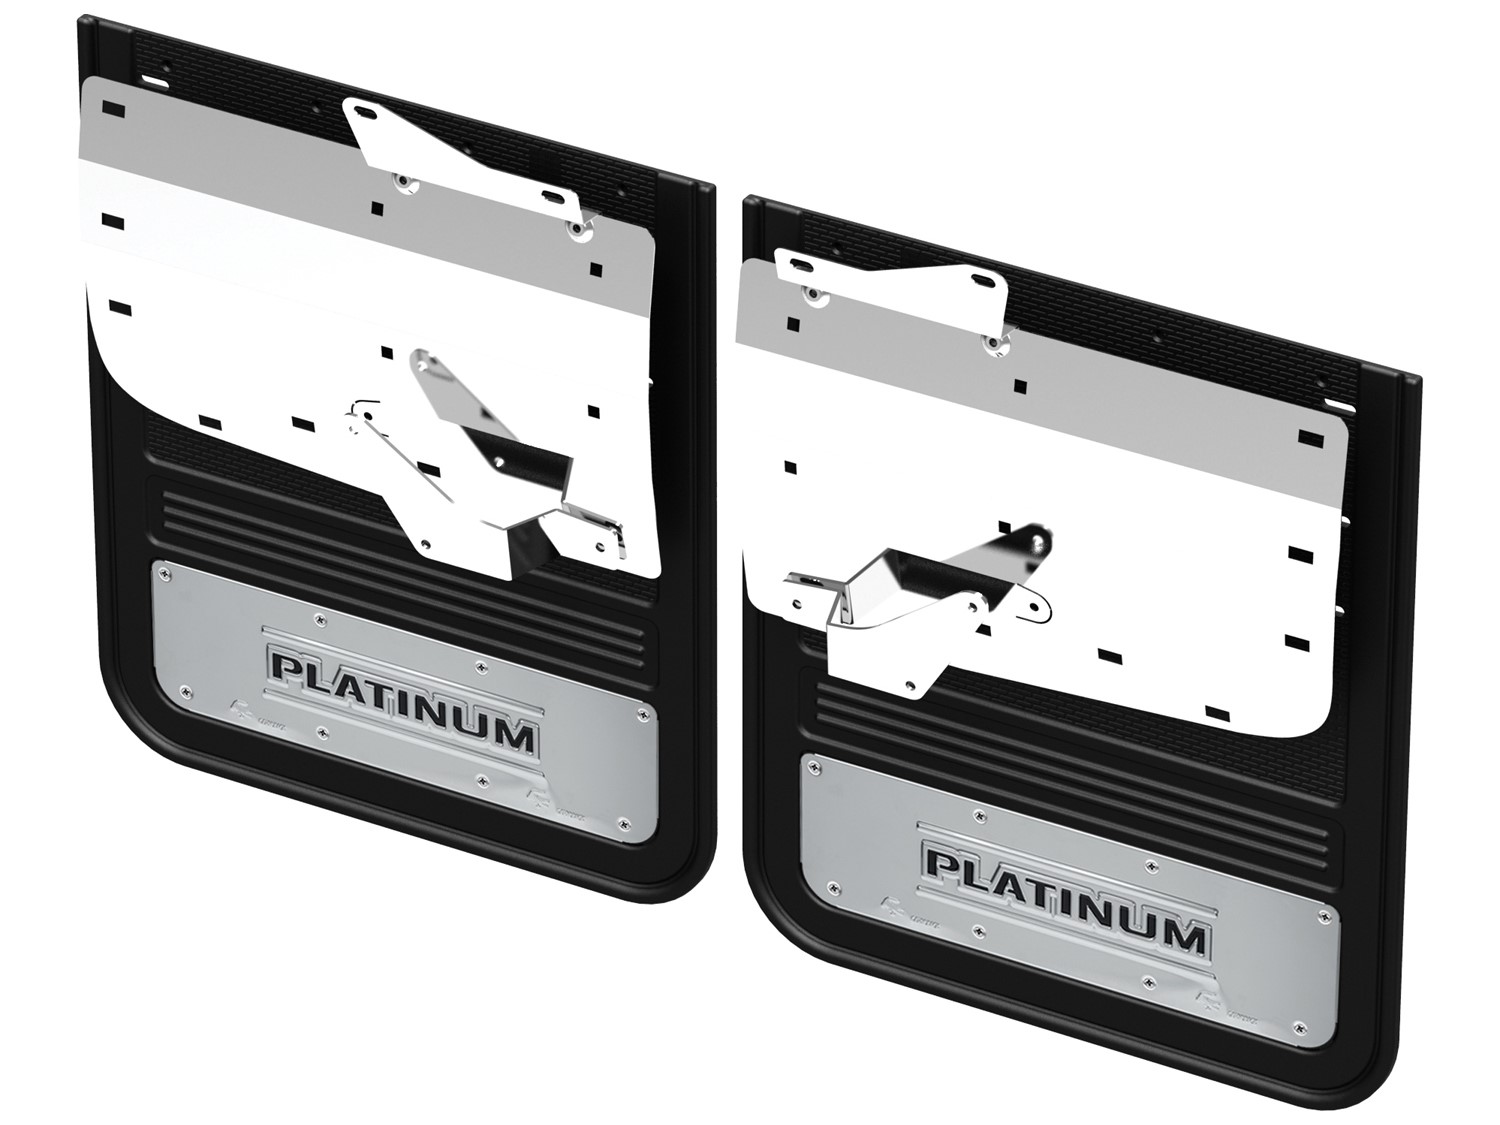 Image for Splash Guards - Gatorback by Truck Hardware, Rear Pair, DRW w/PLATINUM Die-Stamped Stainless Insert from AccessoriesCanada